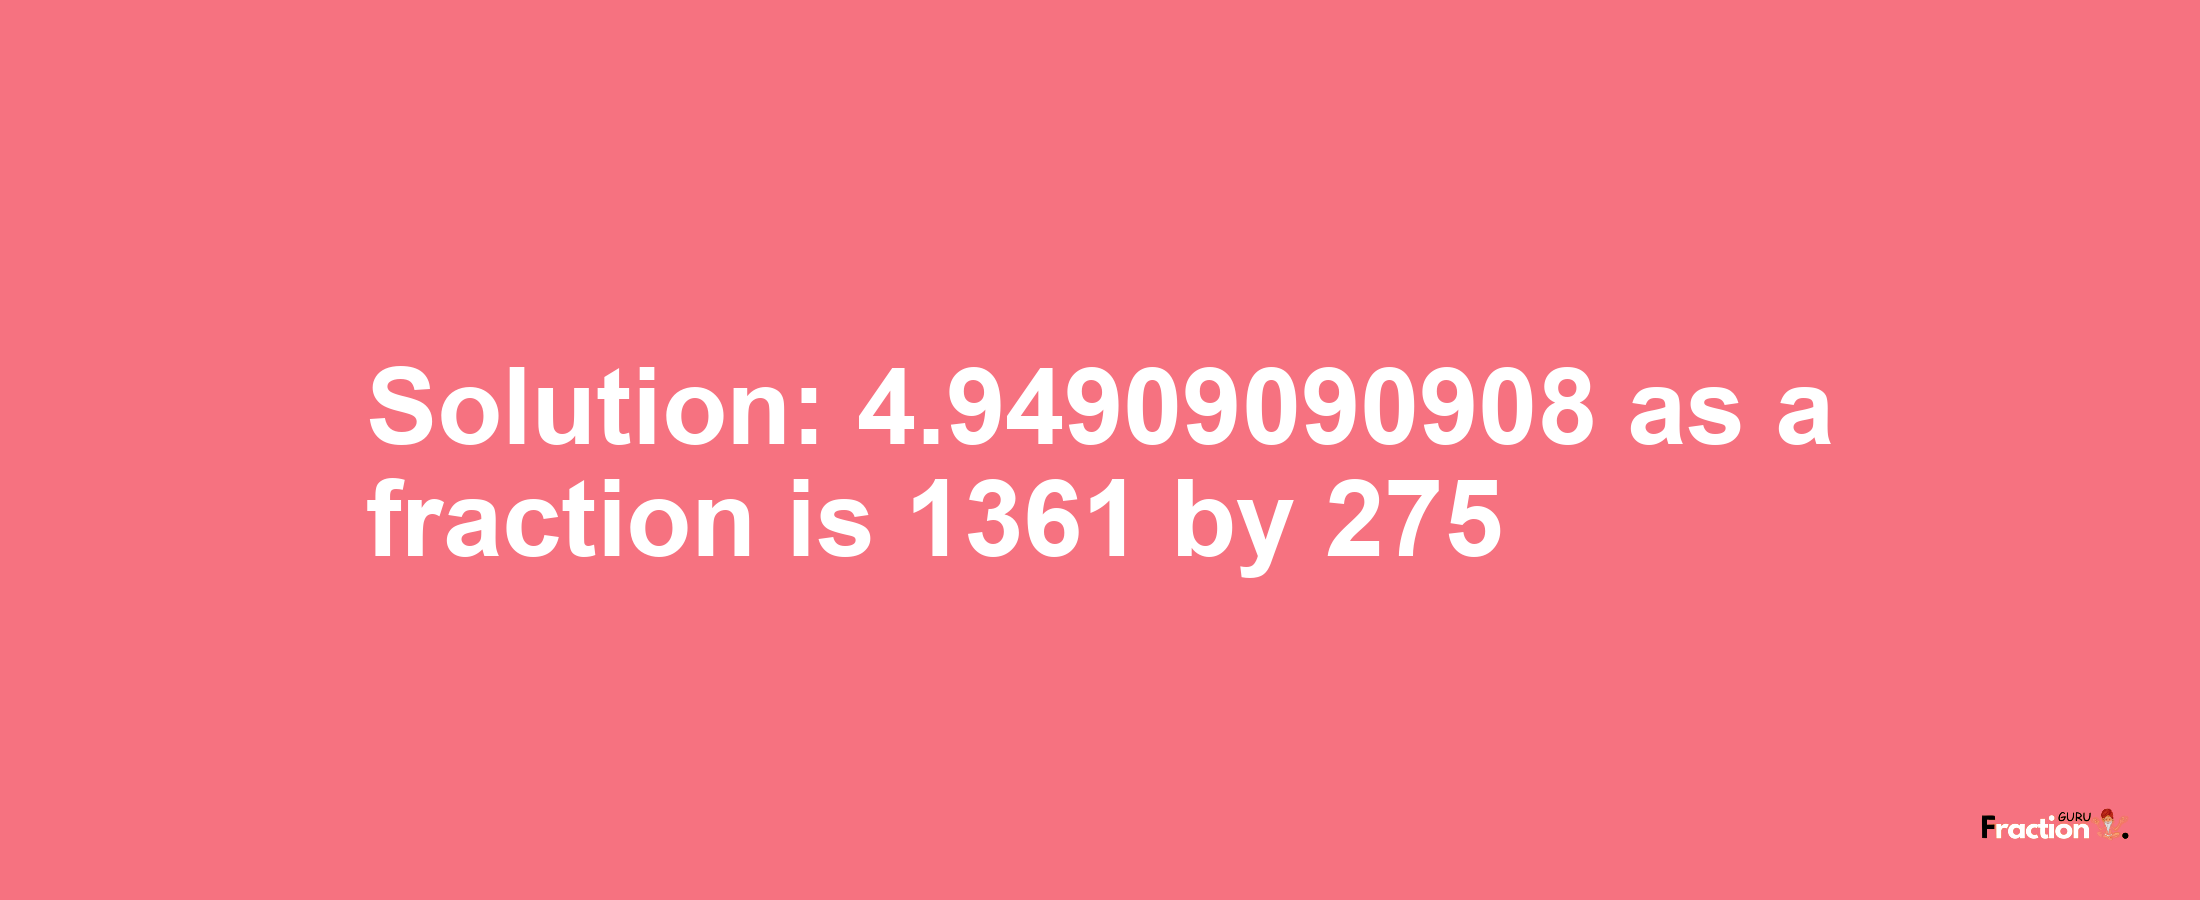 Solution:4.94909090908 as a fraction is 1361/275